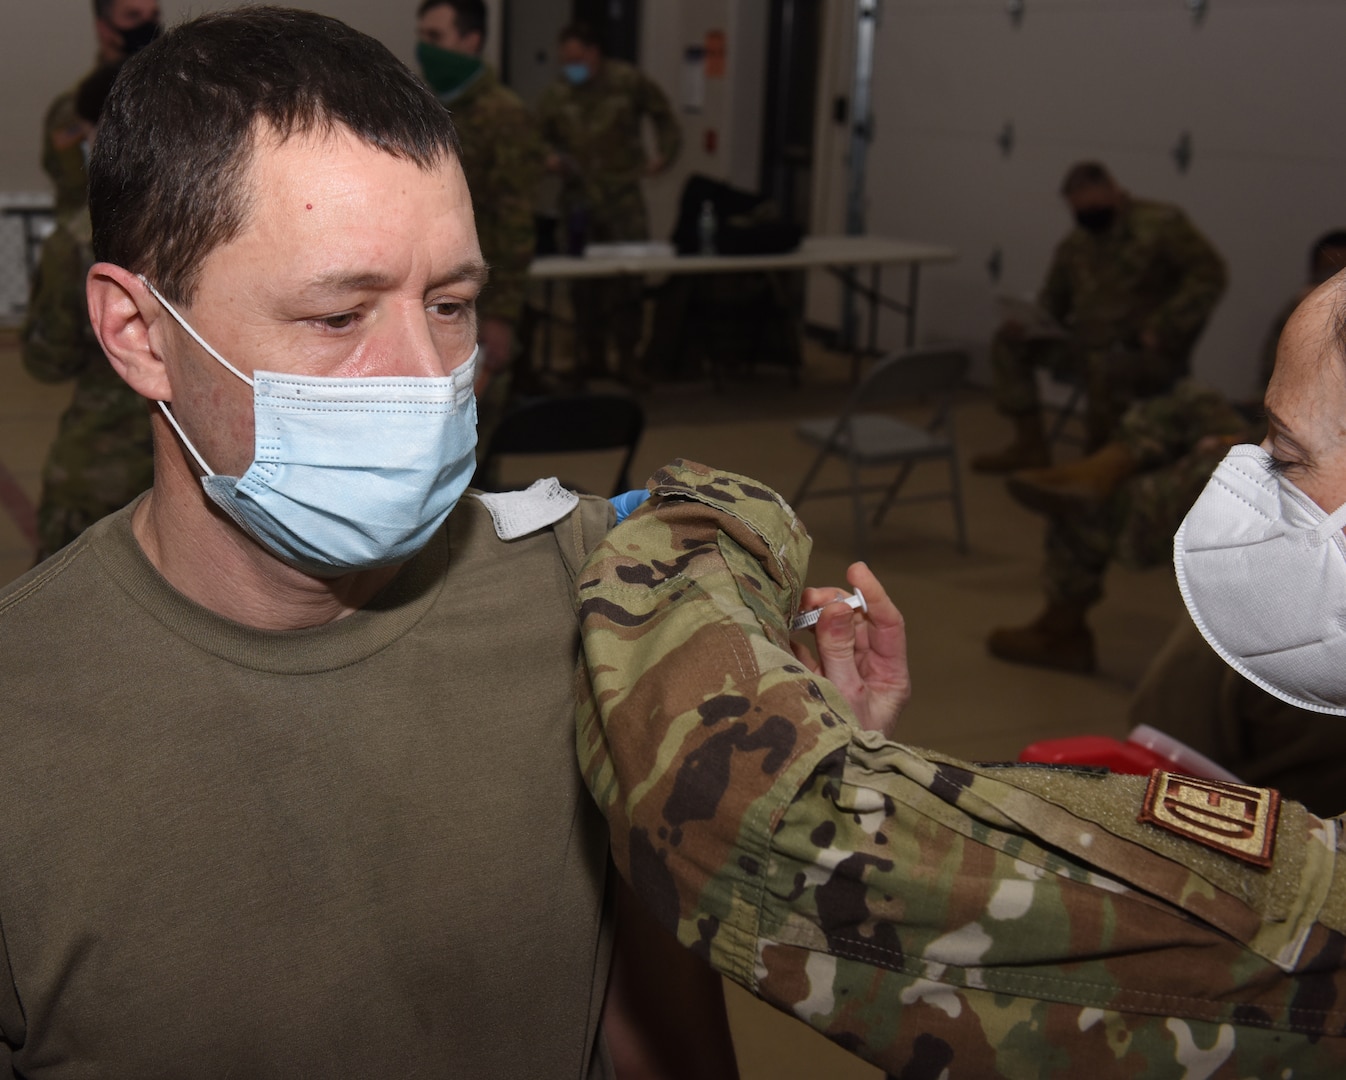 Sgt. Kevin LaPierre receives his second dose of COVID-19 vaccine from Lt. Col. Sarah Davis Feb. 3, 2021, at Camp Johnson, Vermont. Recipients of the vaccines second dose commonly experience mild flu-like symptoms including soreness and mild fever. LaPierre is a fueler with the Vermont National Guard's 186th Brigade Support Battalion. Davis is a registered nurse and the officer in charge of immunizations for the Vermont Air National Guard's 158th Medical Group. (U.S. Army National Guard photo by Don Branum)